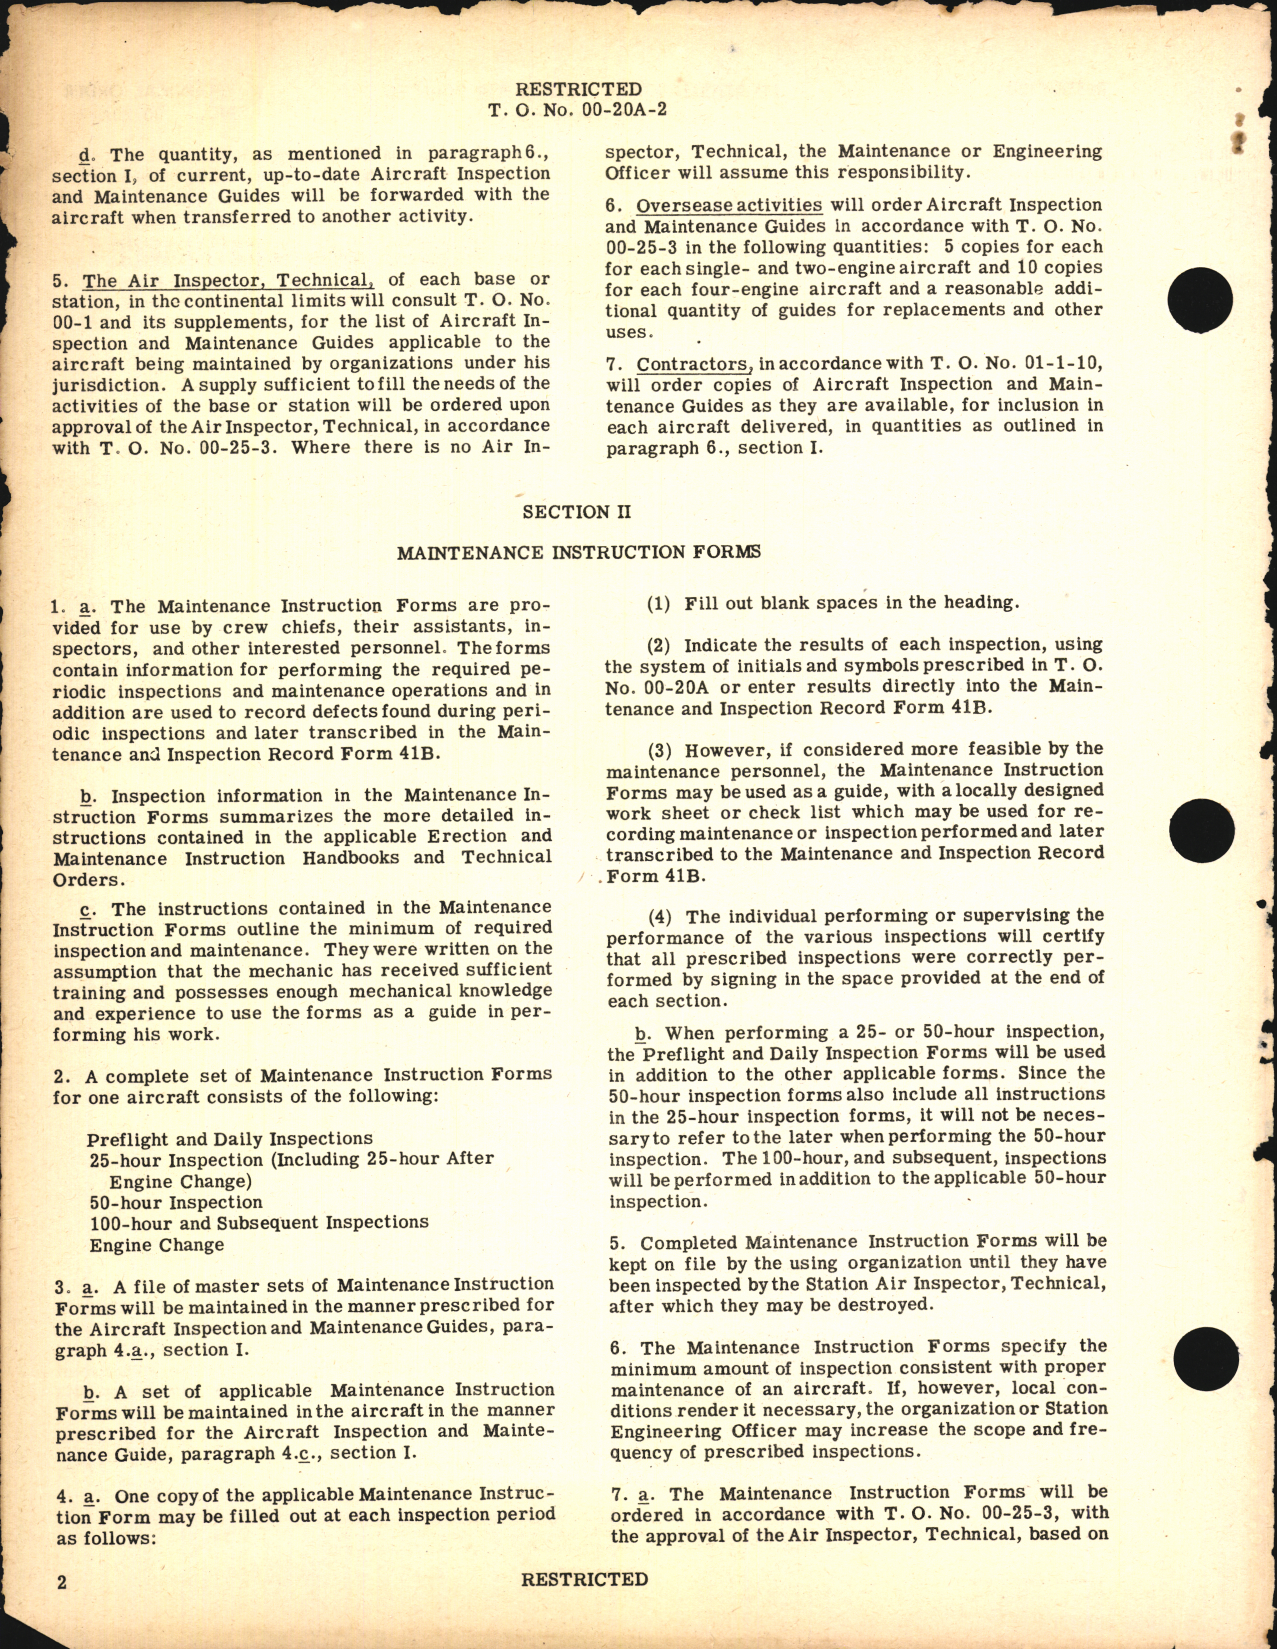 Sample page 2 from AirCorps Library document: Aircraft Inspection and Maintenance Guides and Maintenance Instruction Forms